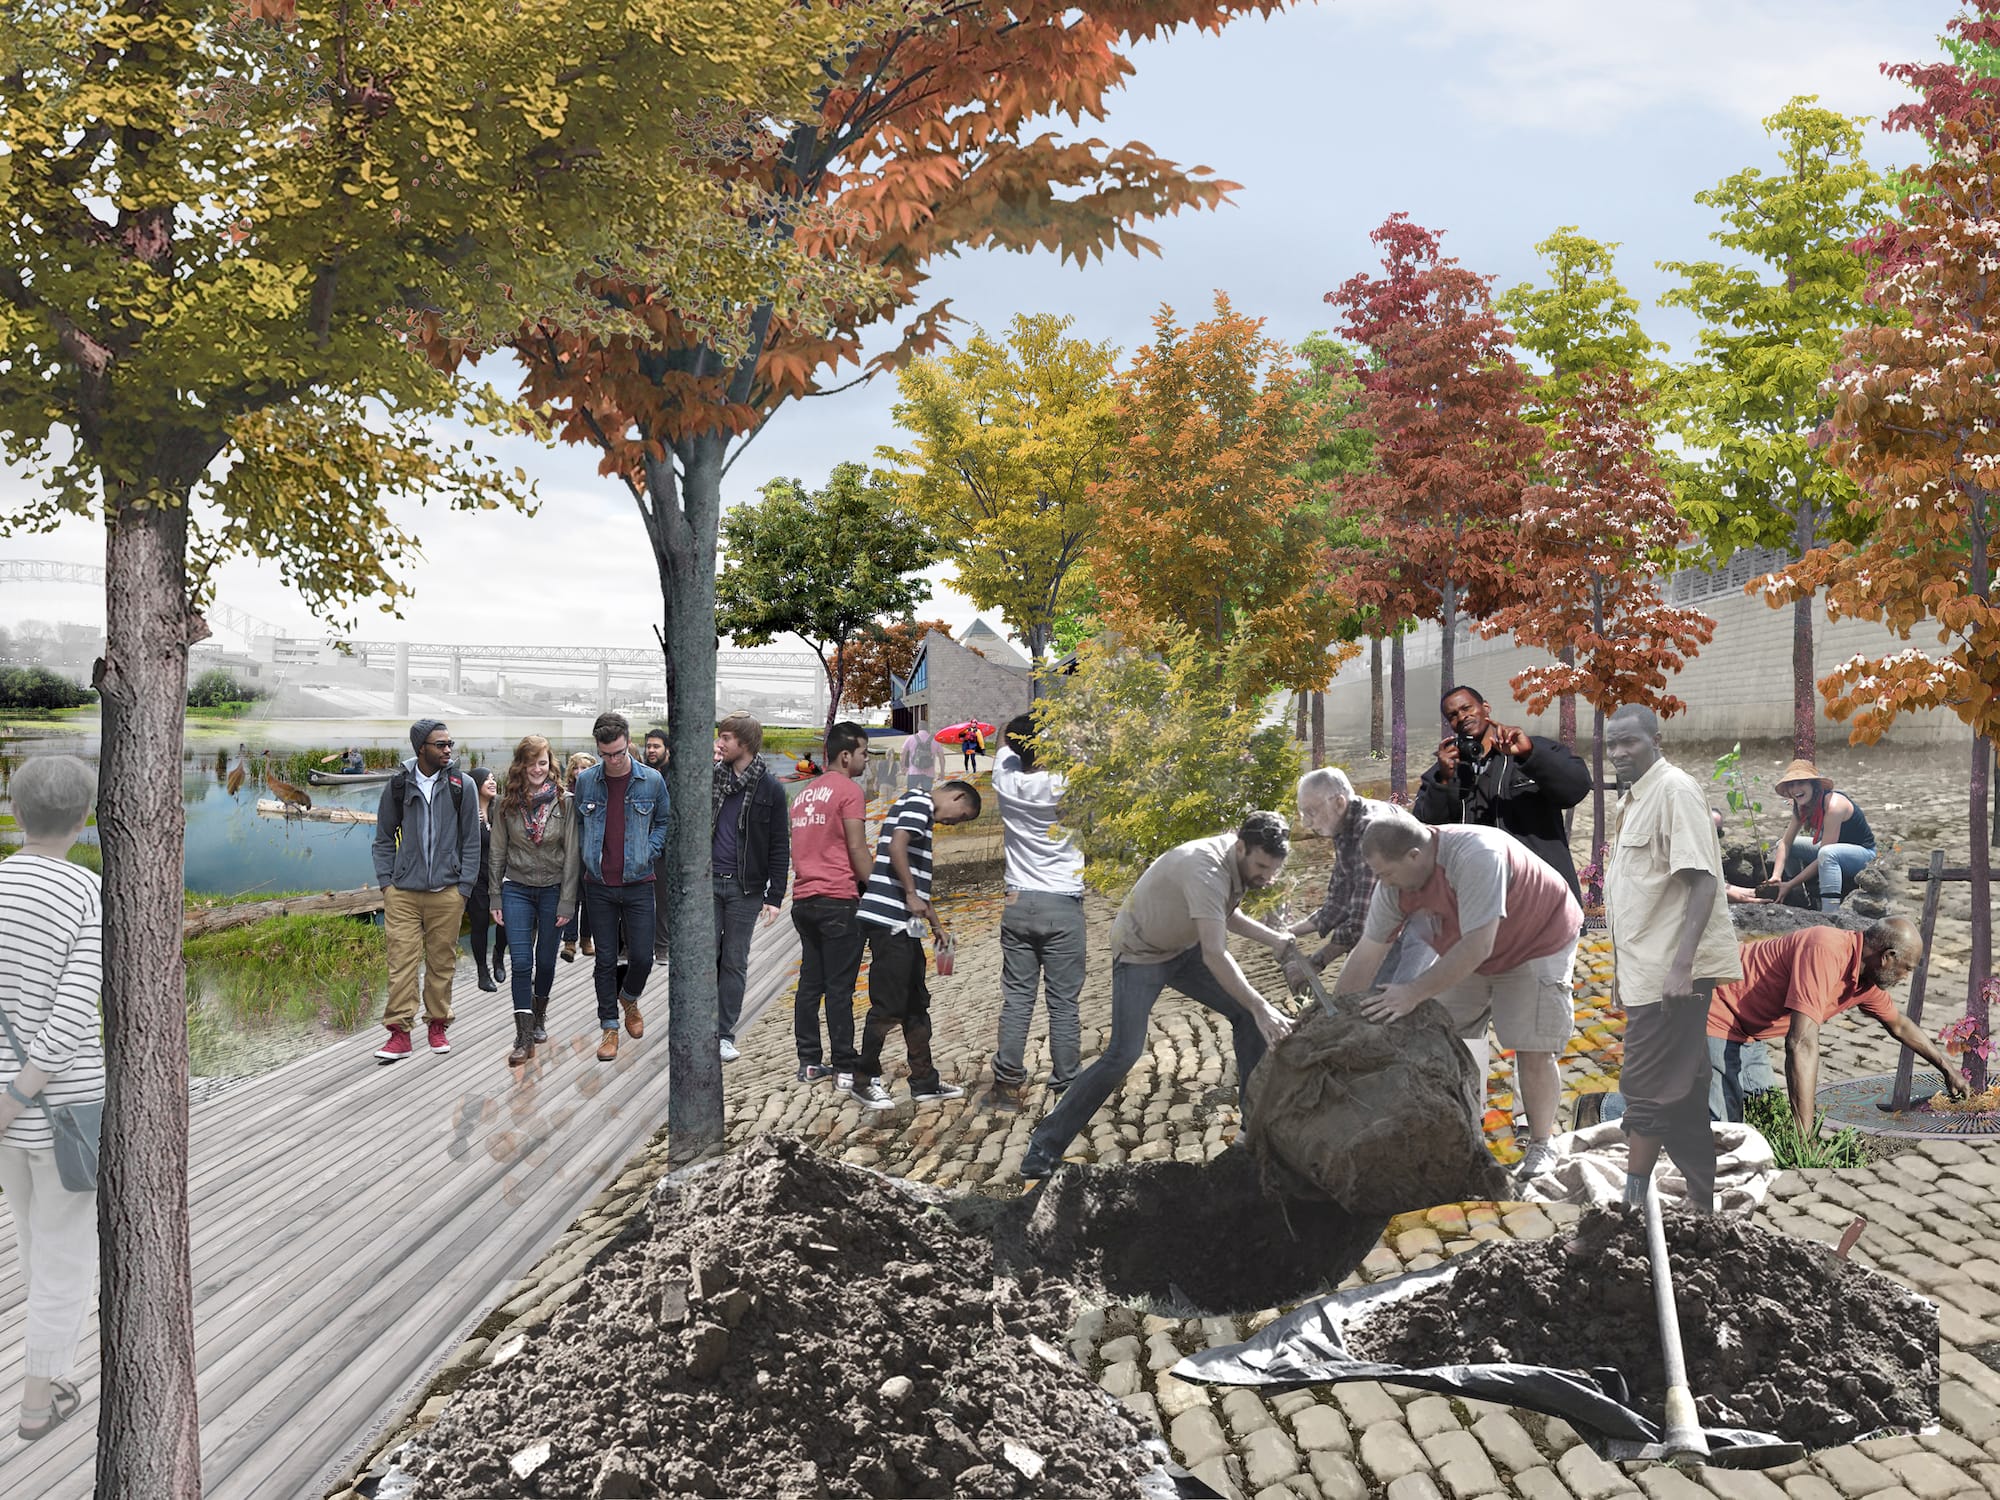 Studio Gang’s early proposal for Memphis Landing, developed for their Memphis Riverfront Concept (2017), imagined the site’s transformation beginning with a community tree planting event that would bring shade and softness to its hardscape. For _Dimensions of Citizenship_, the Studio is working in greater depth with Memphis residents to explore how the Landing can become a meaningful site of civic memory for all Memphians. © Studio Gang